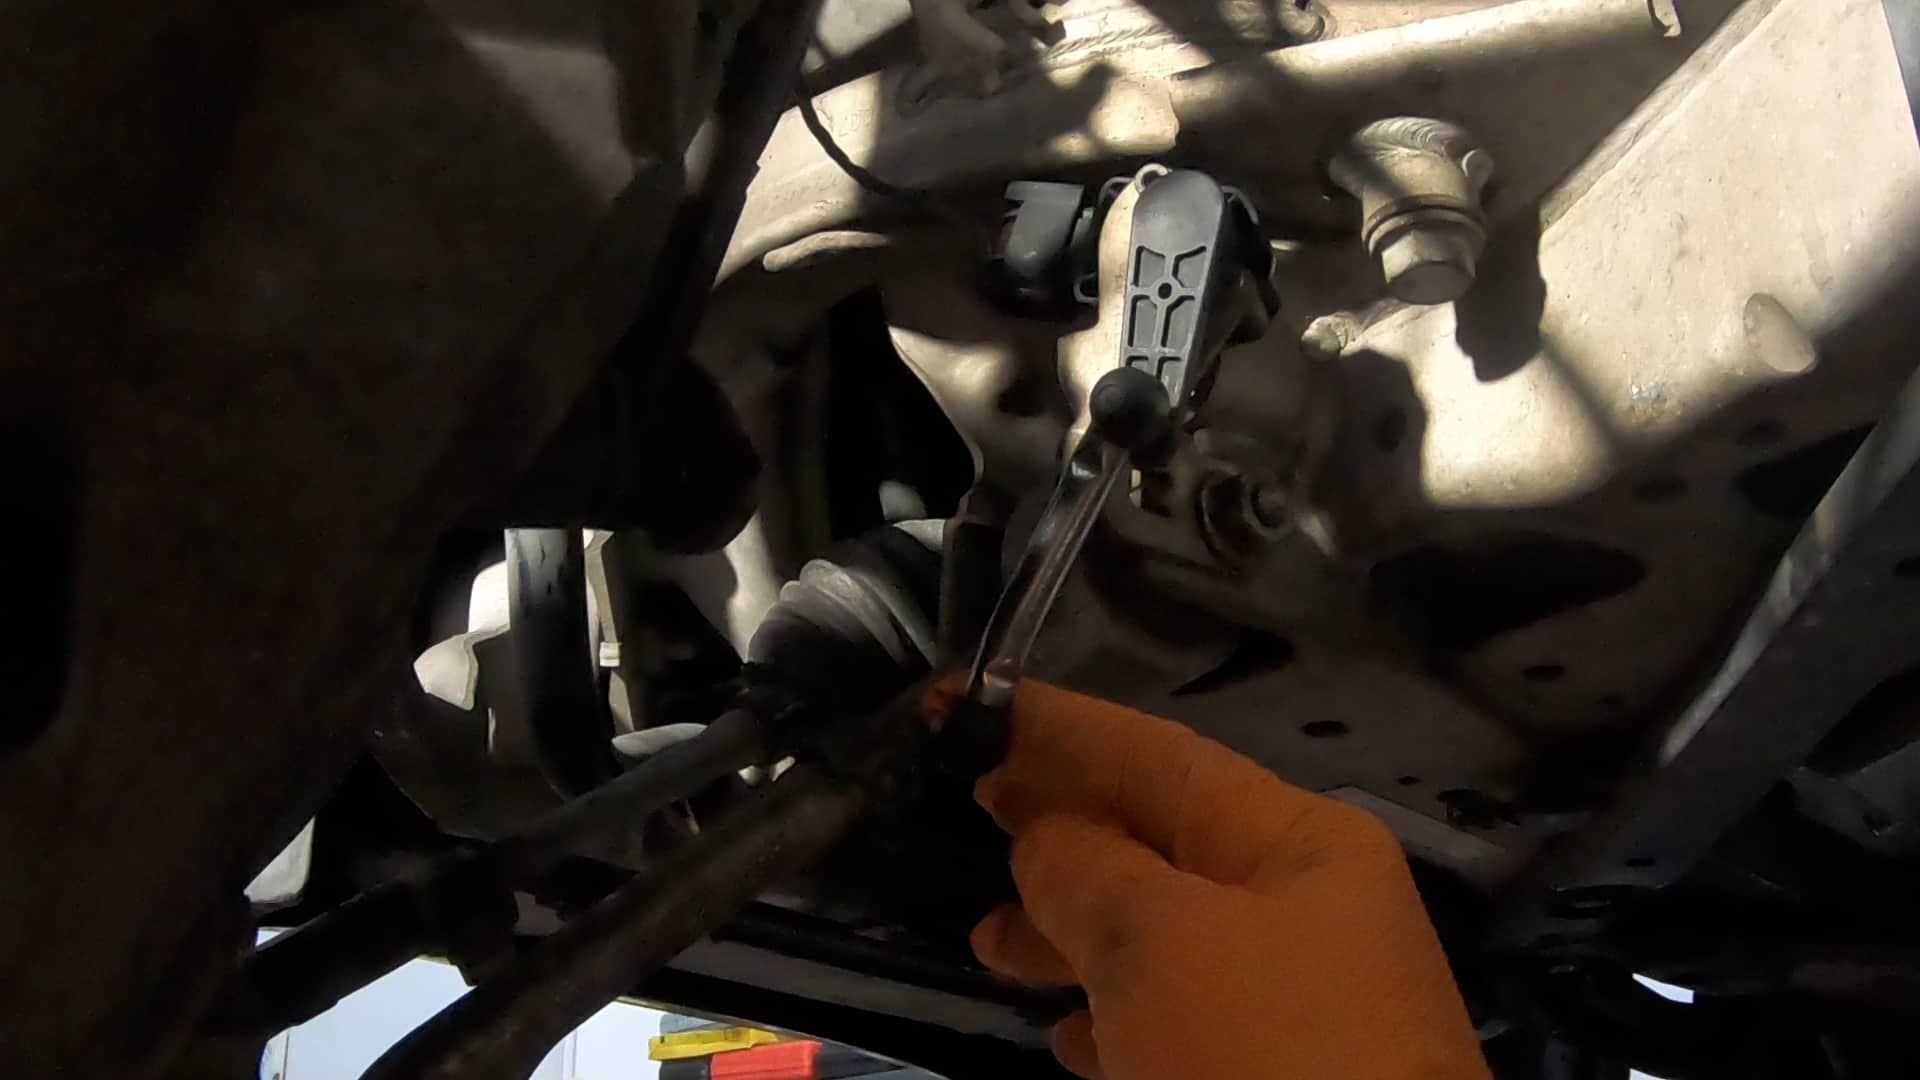 bmw e90 front strut replacement - Disconnect the self-leveling headlight sensor arm